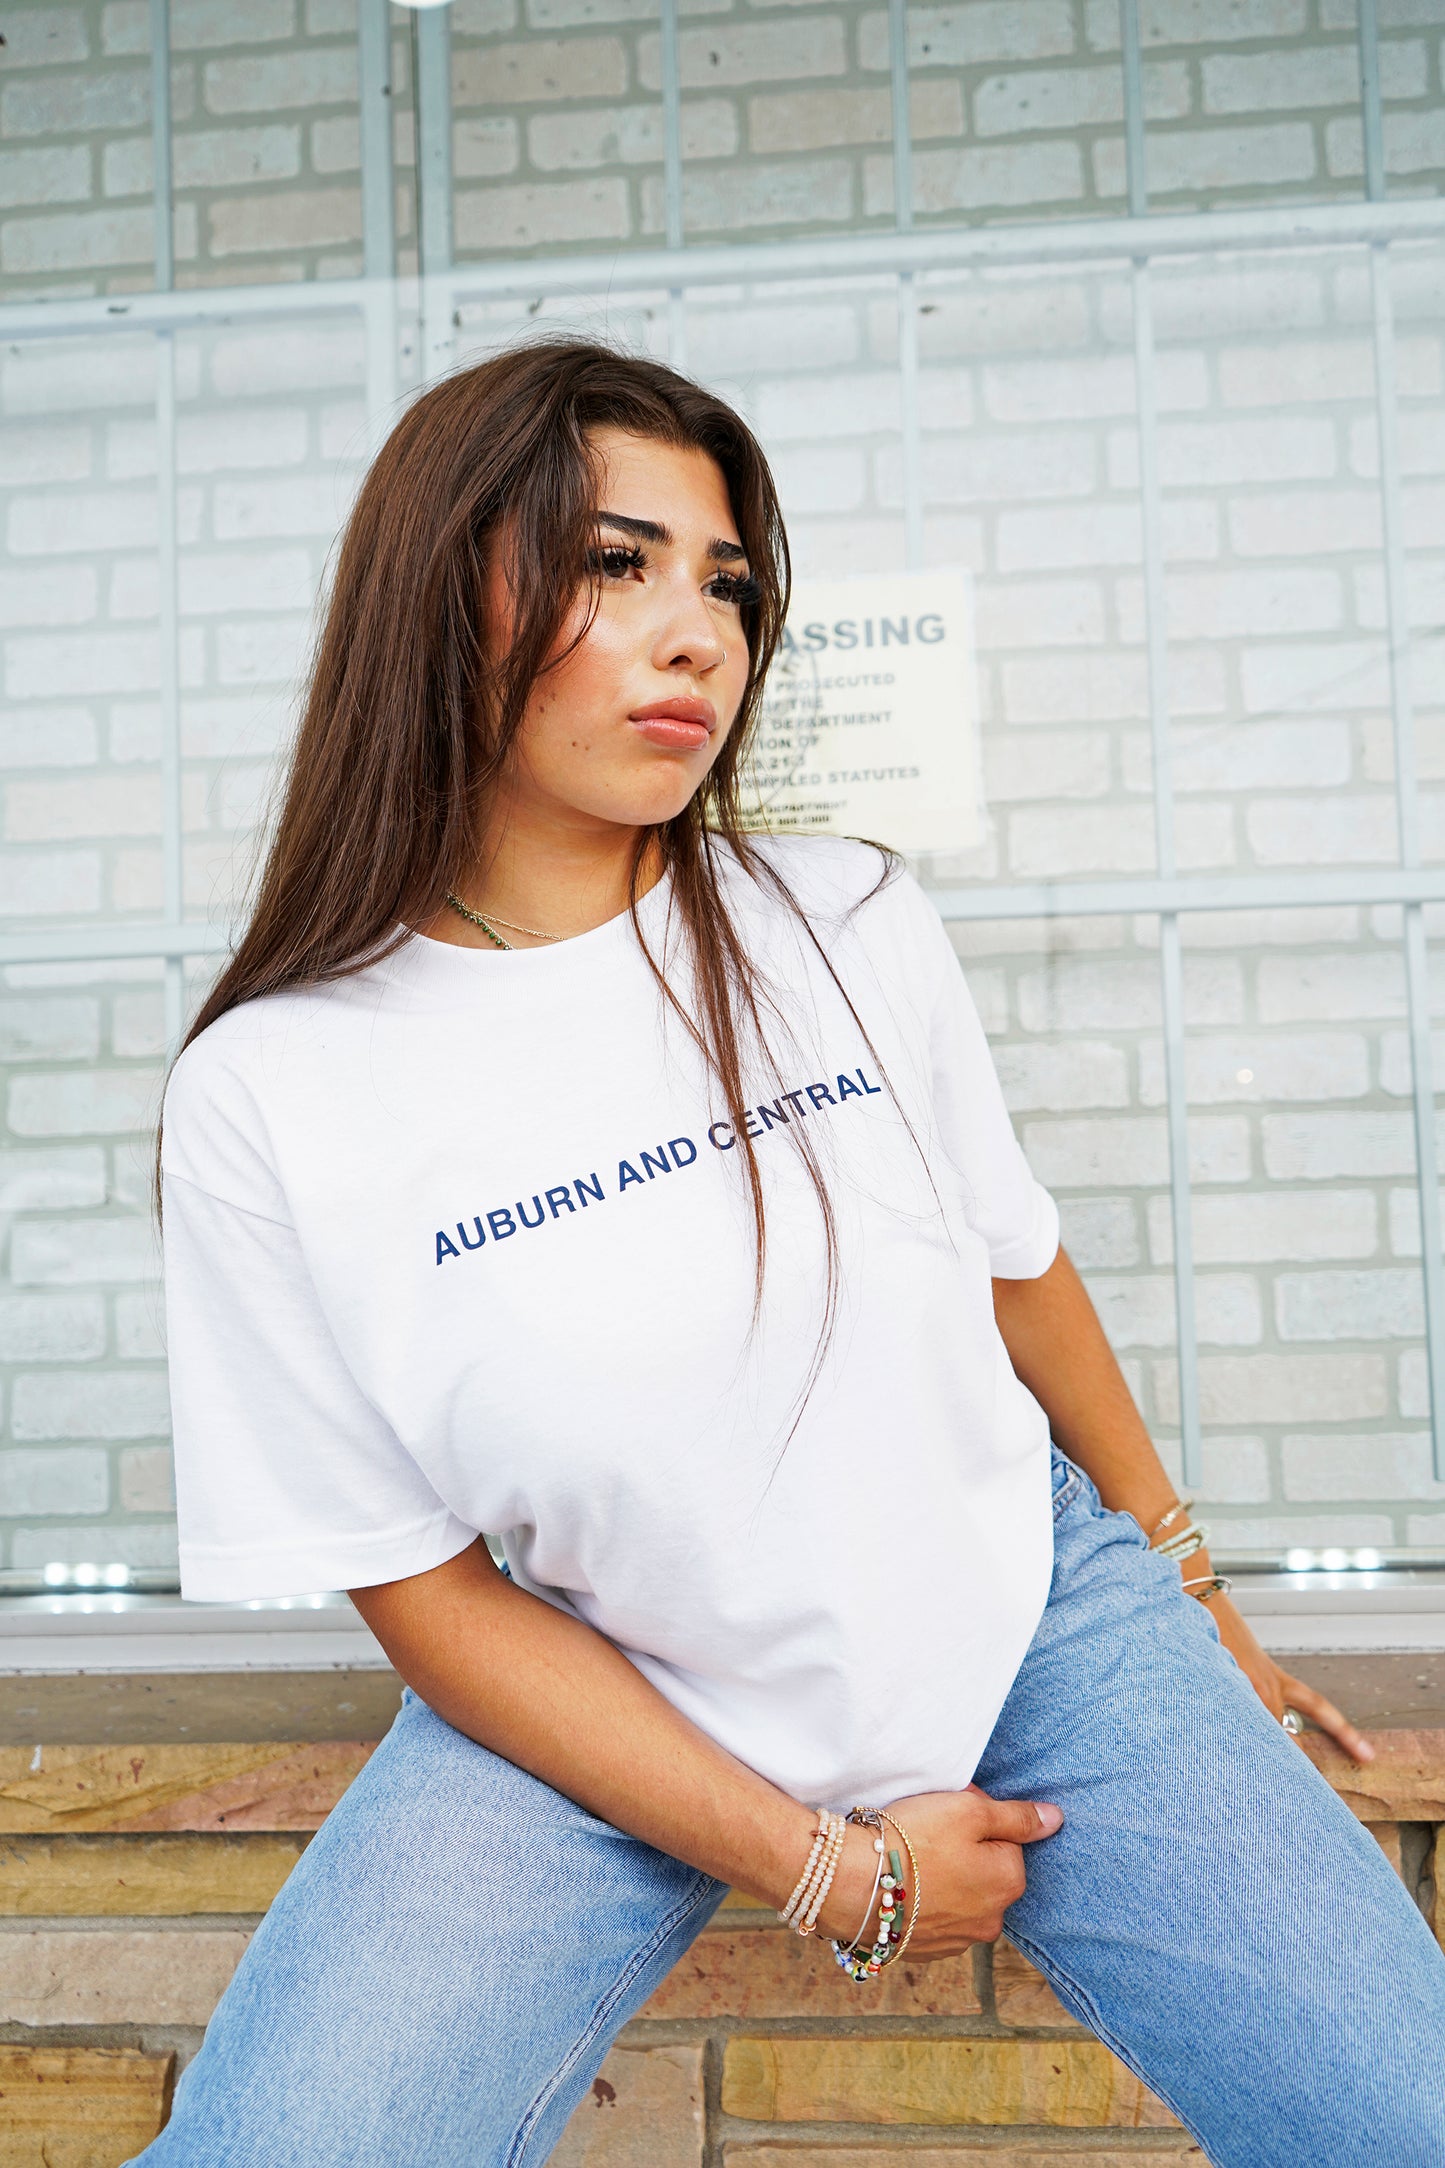 Auburn and Central Tee (White)